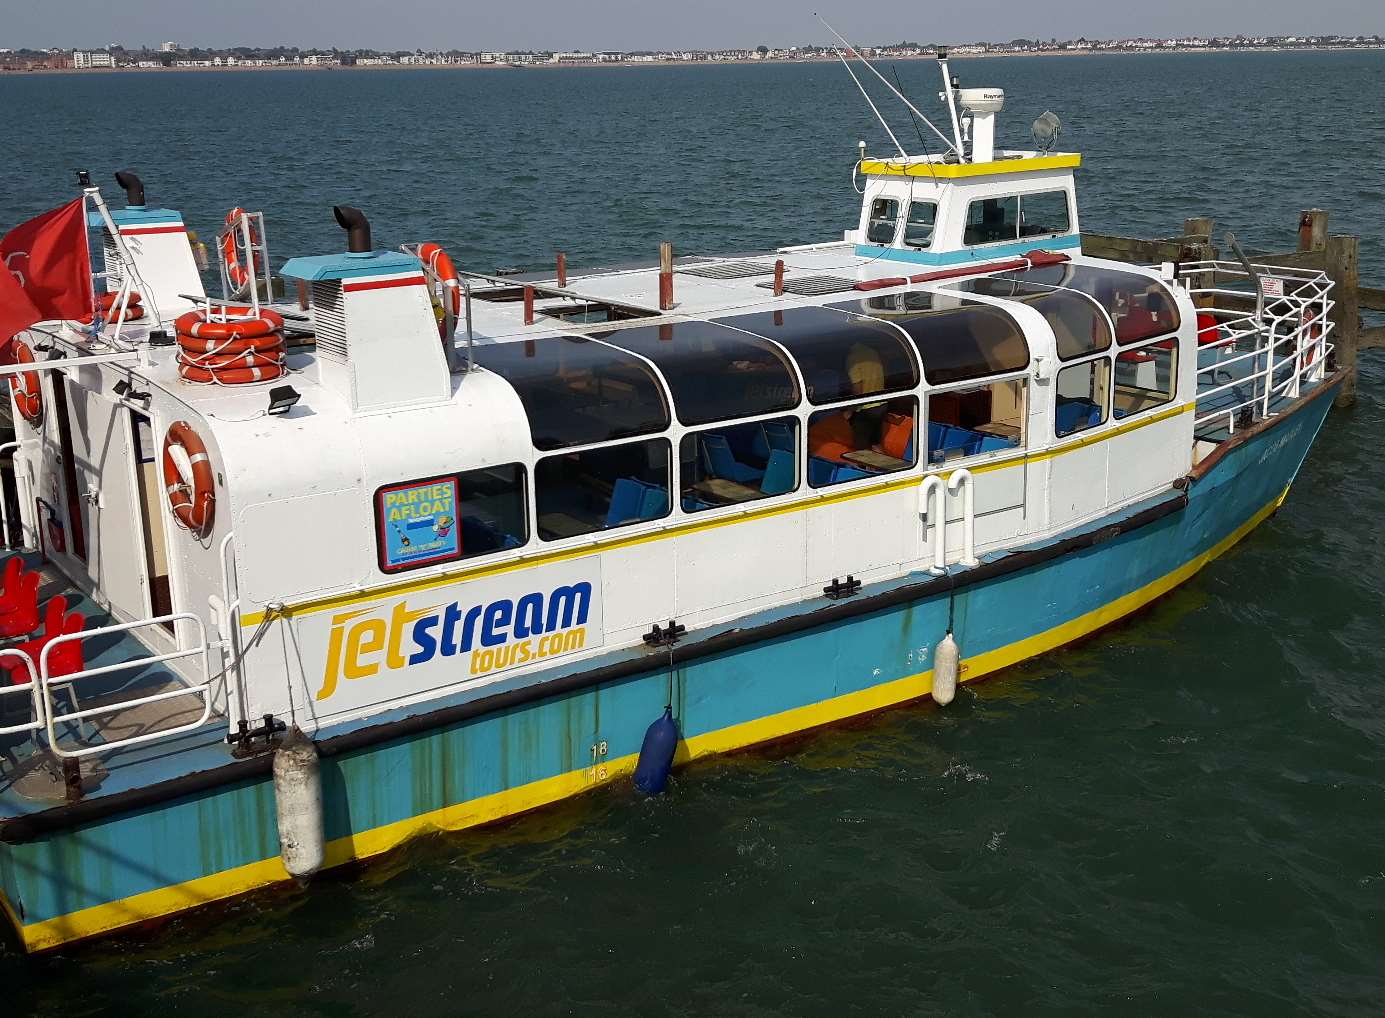 The Jetstream ferry which made the link between Sheppey and Southend